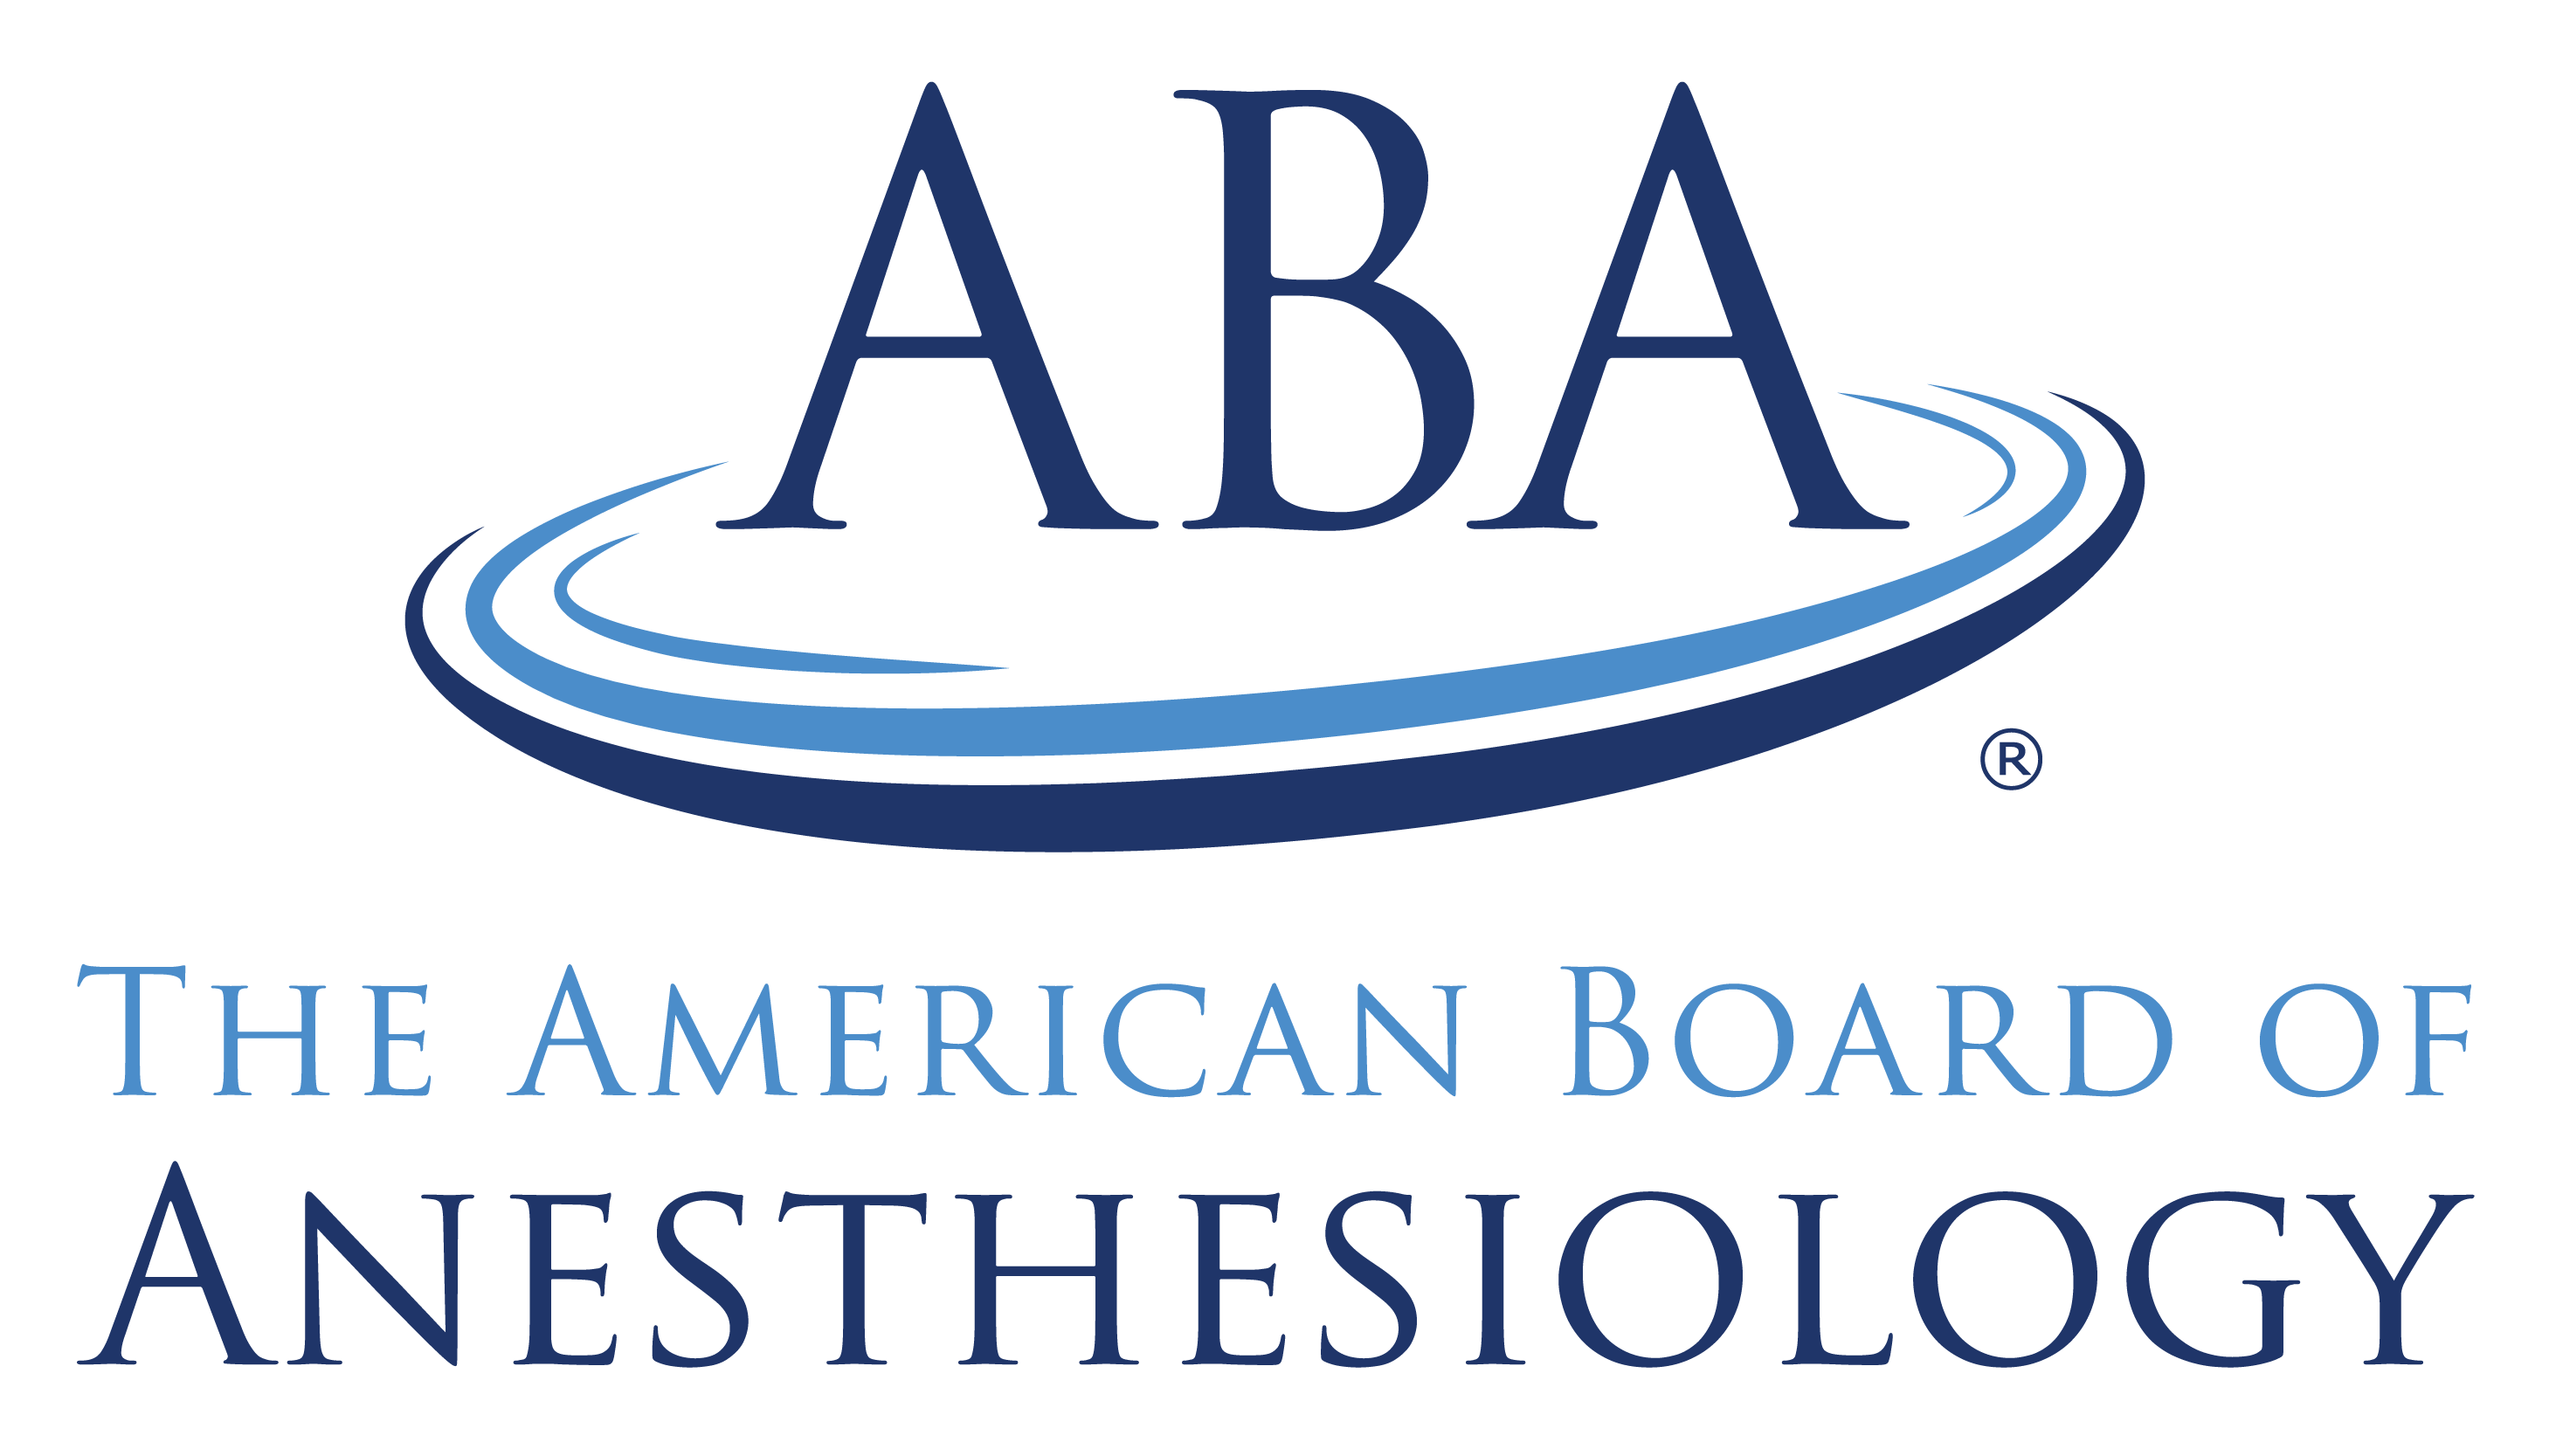 The American Board of Anesthesiology logo